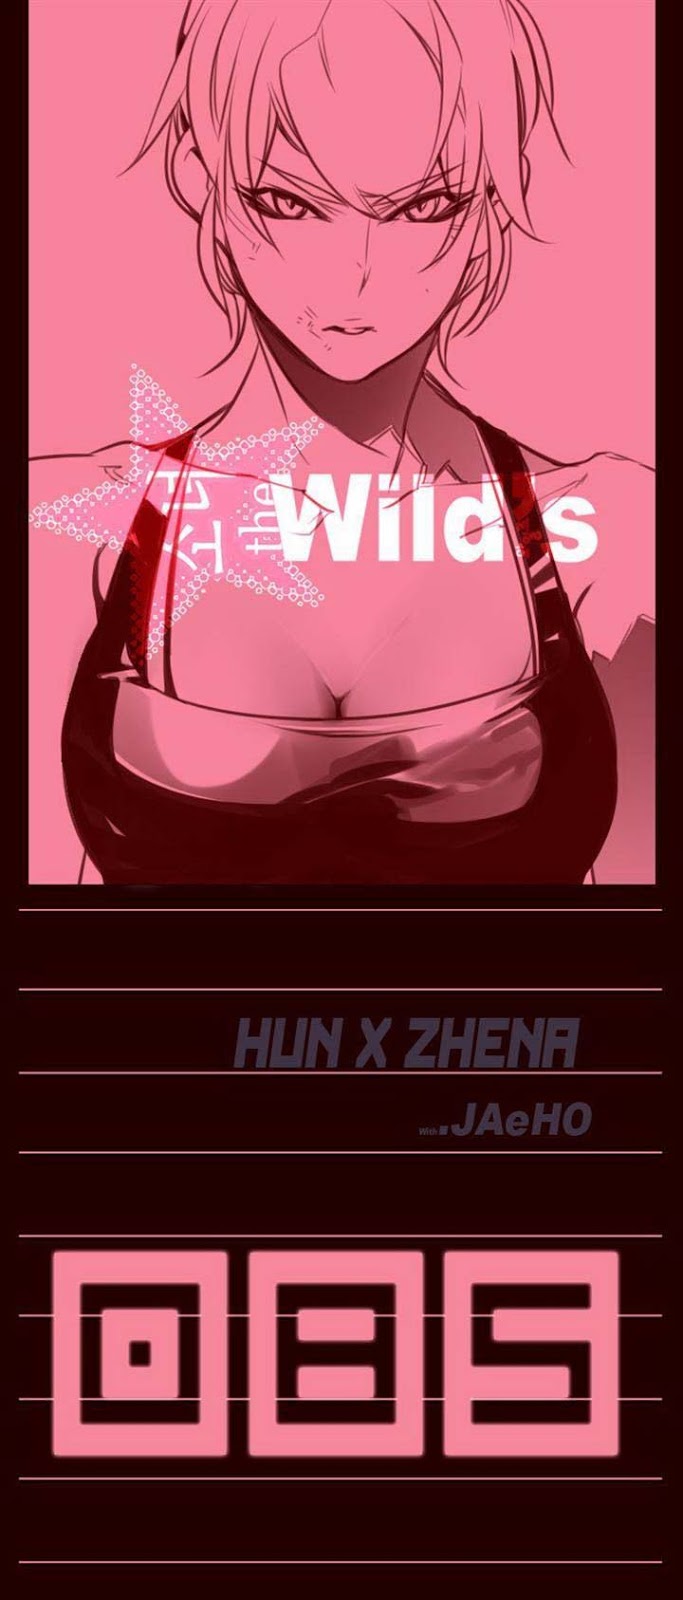 Girl of the Wilds Chapter 85